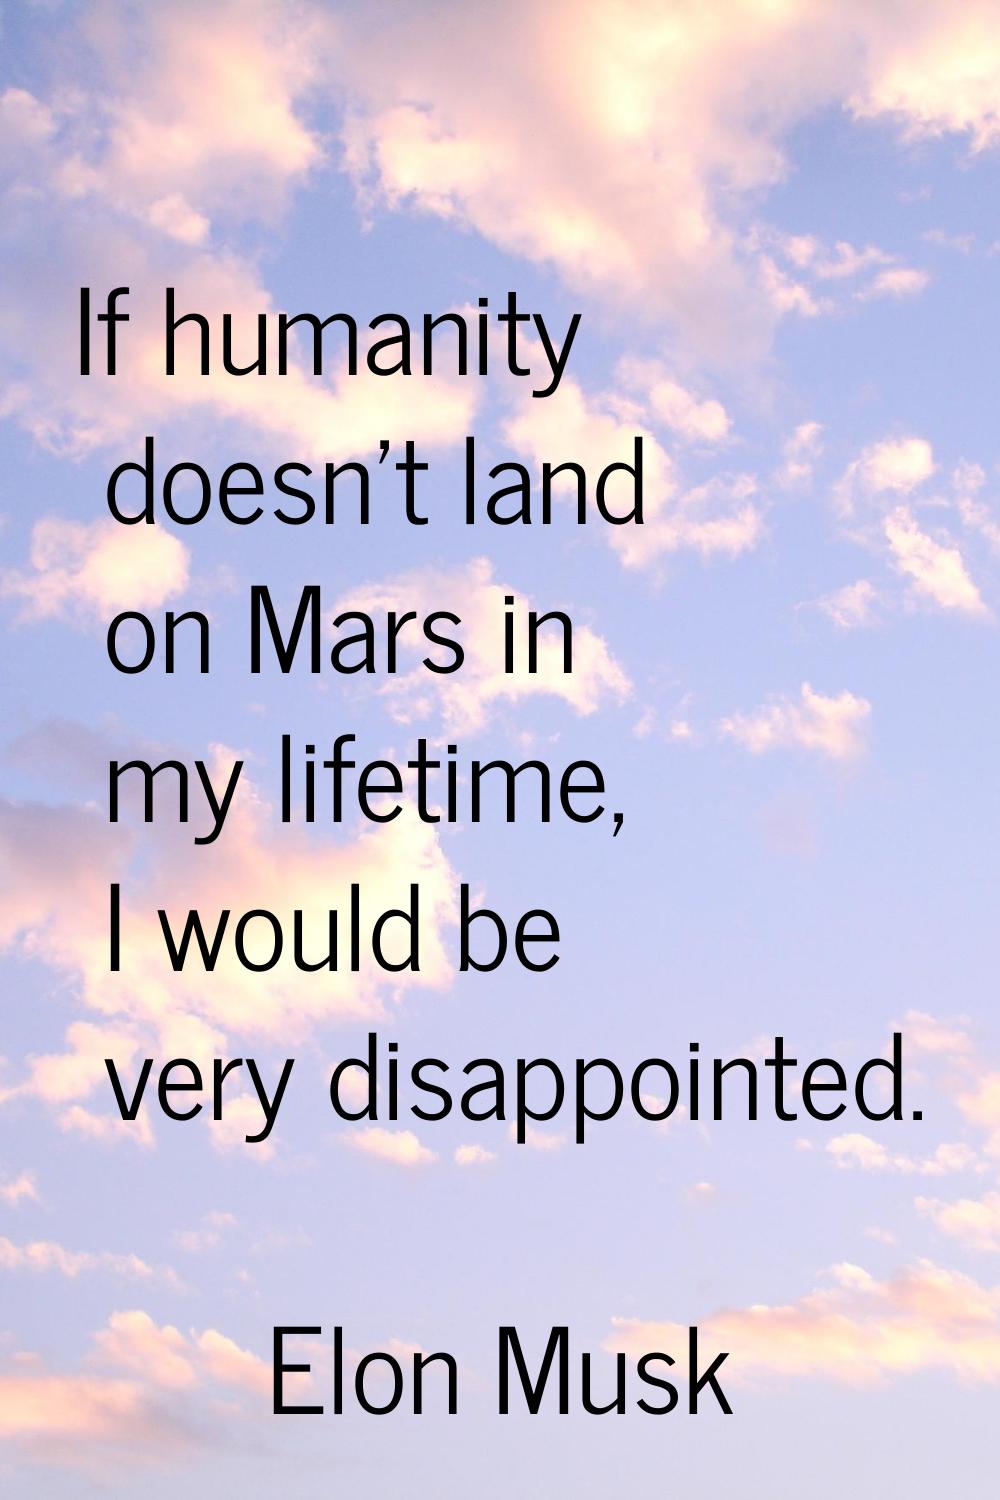 If humanity doesn't land on Mars in my lifetime, I would be very disappointed.